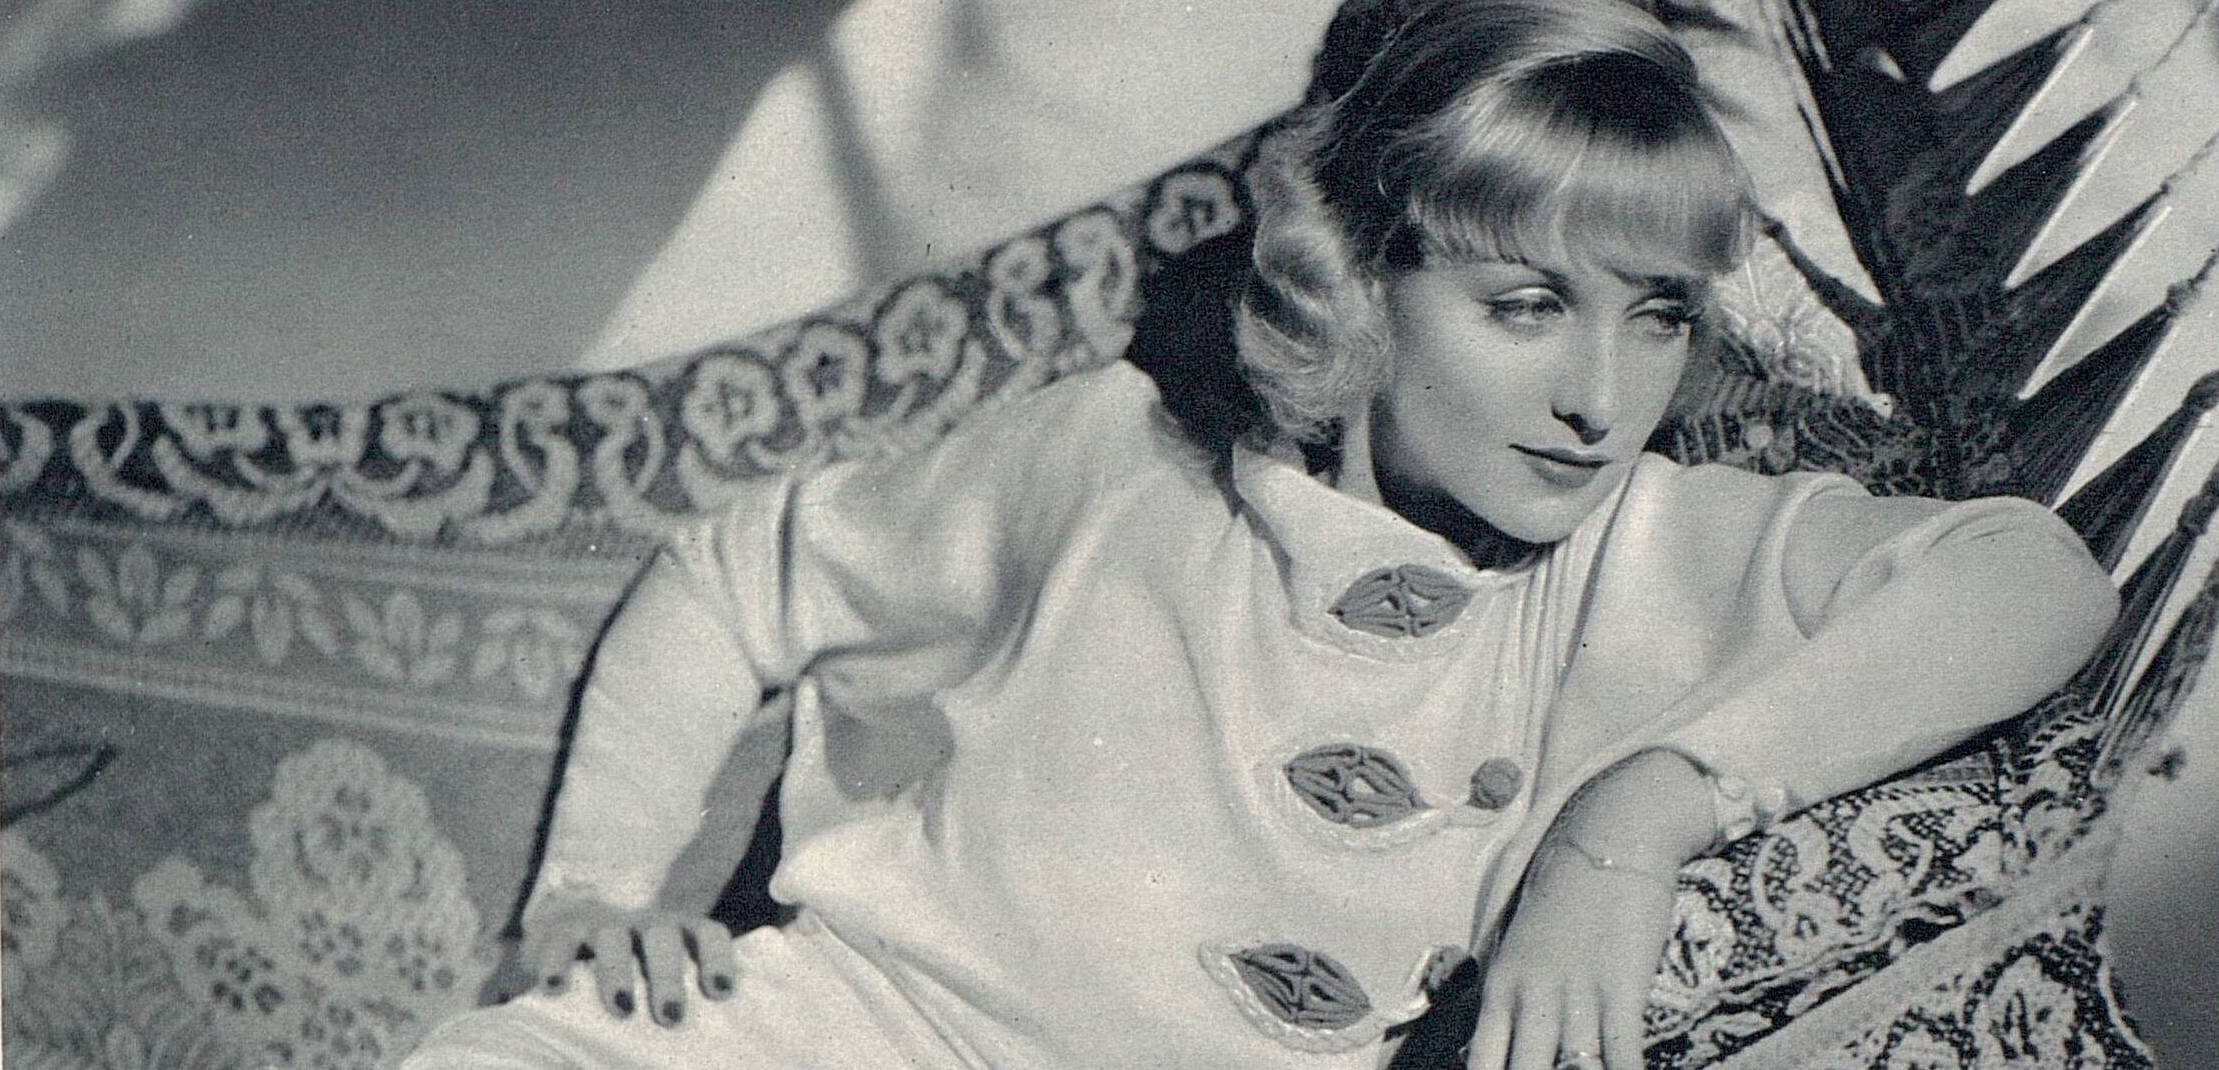 Carole Lombard and Flight 3—A Movie Star's Mysterious Death